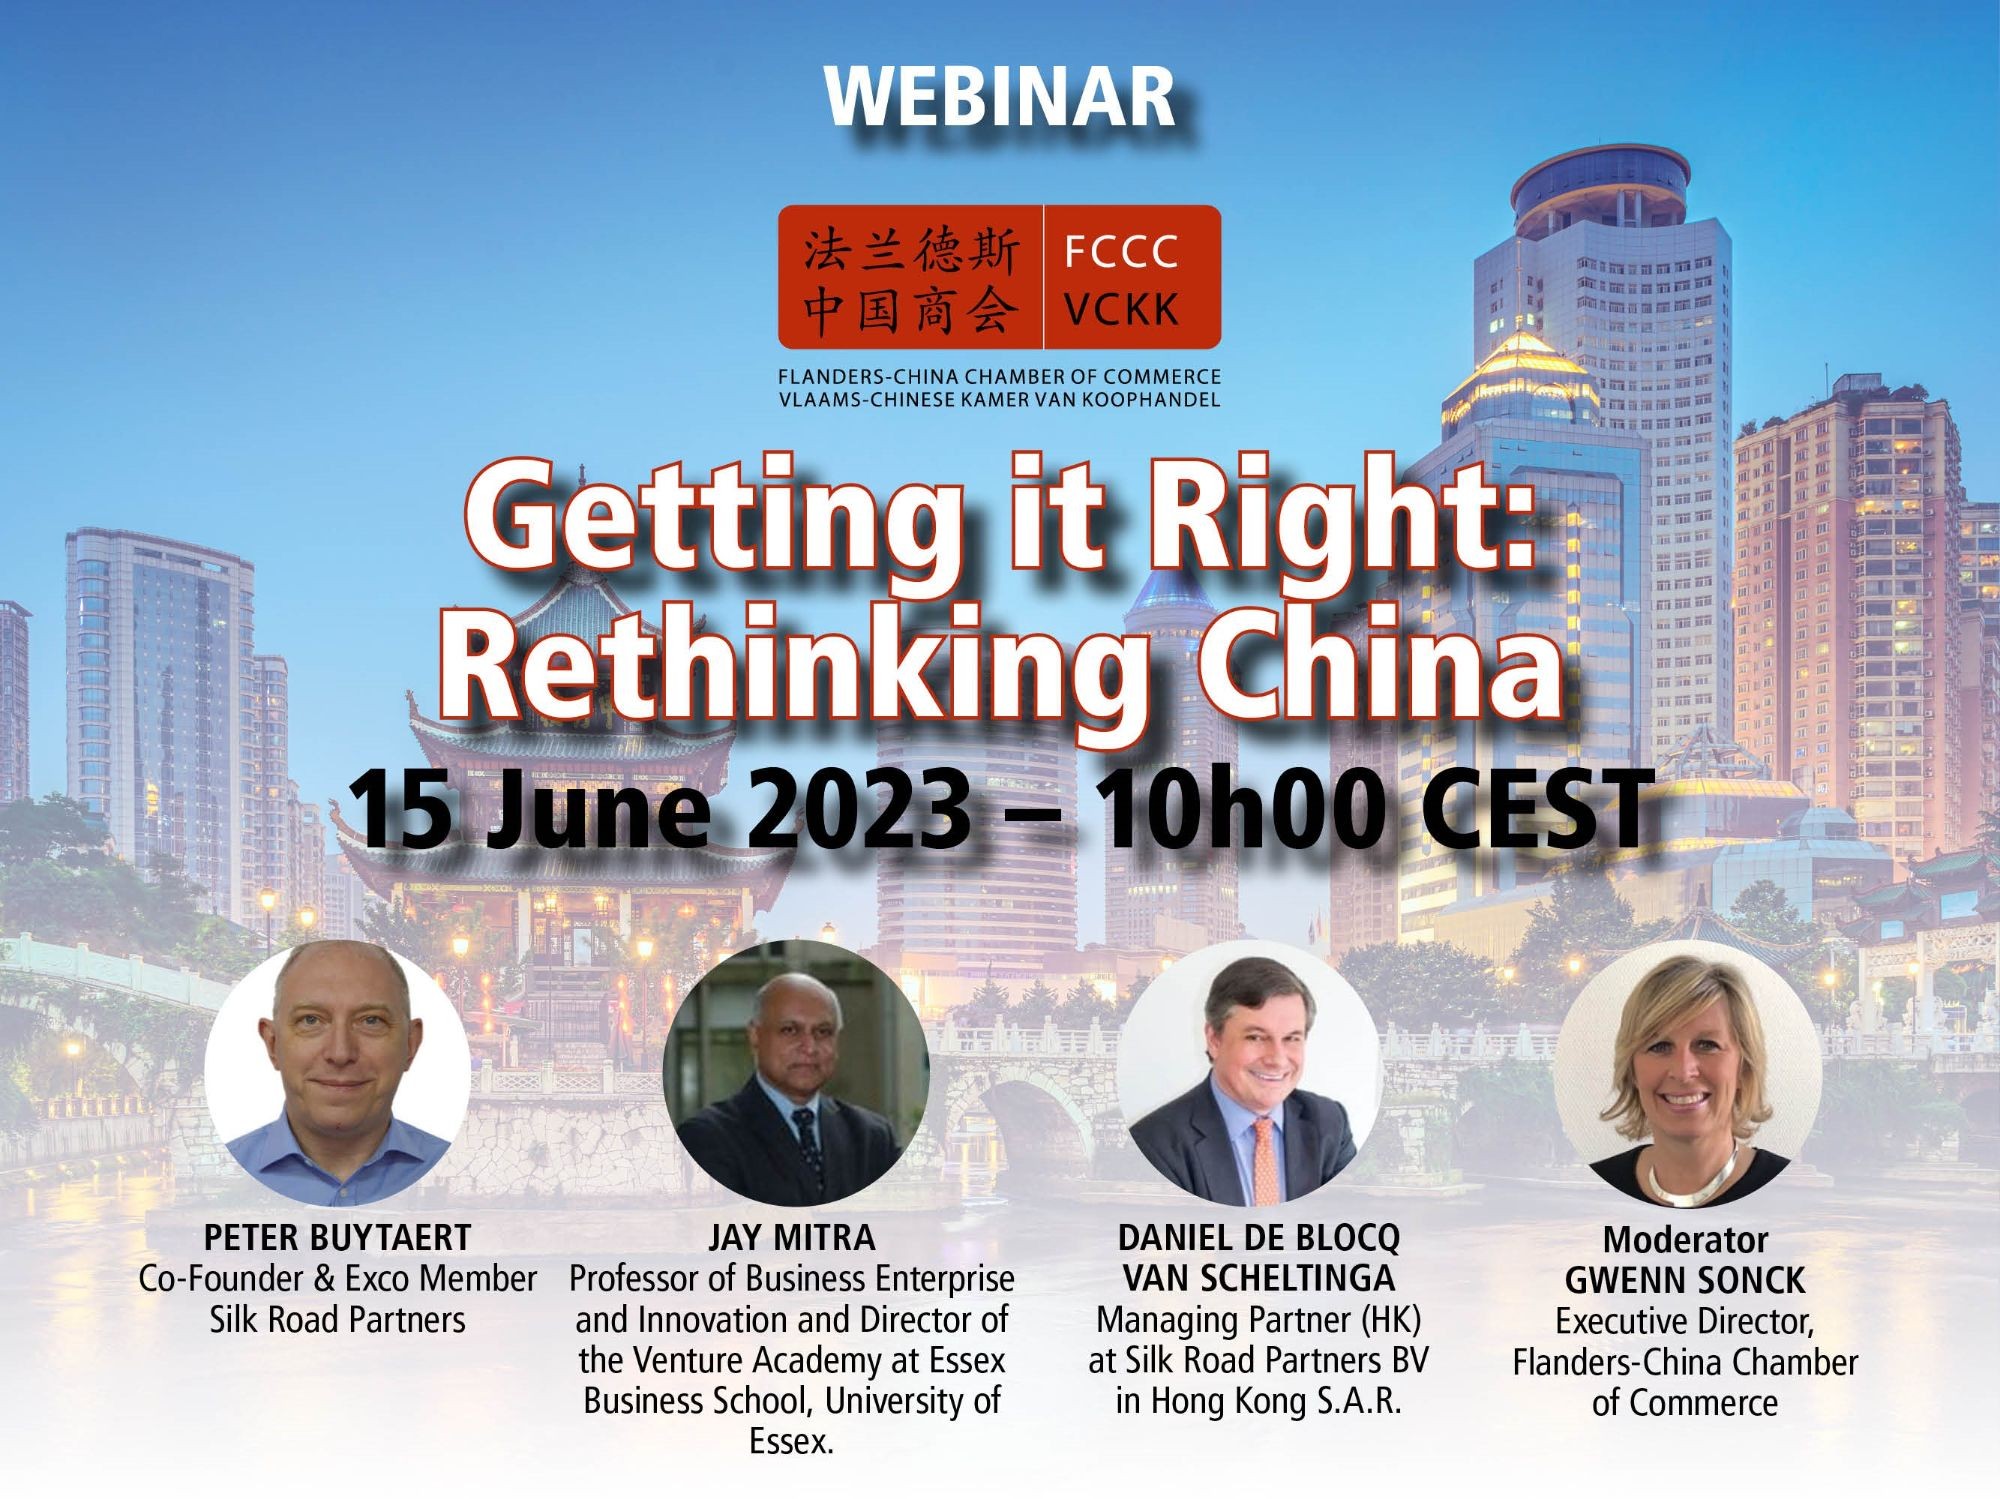 Webinar: Getting it Right: Rethinking China – 15 June 2023 – 10h00 CEST